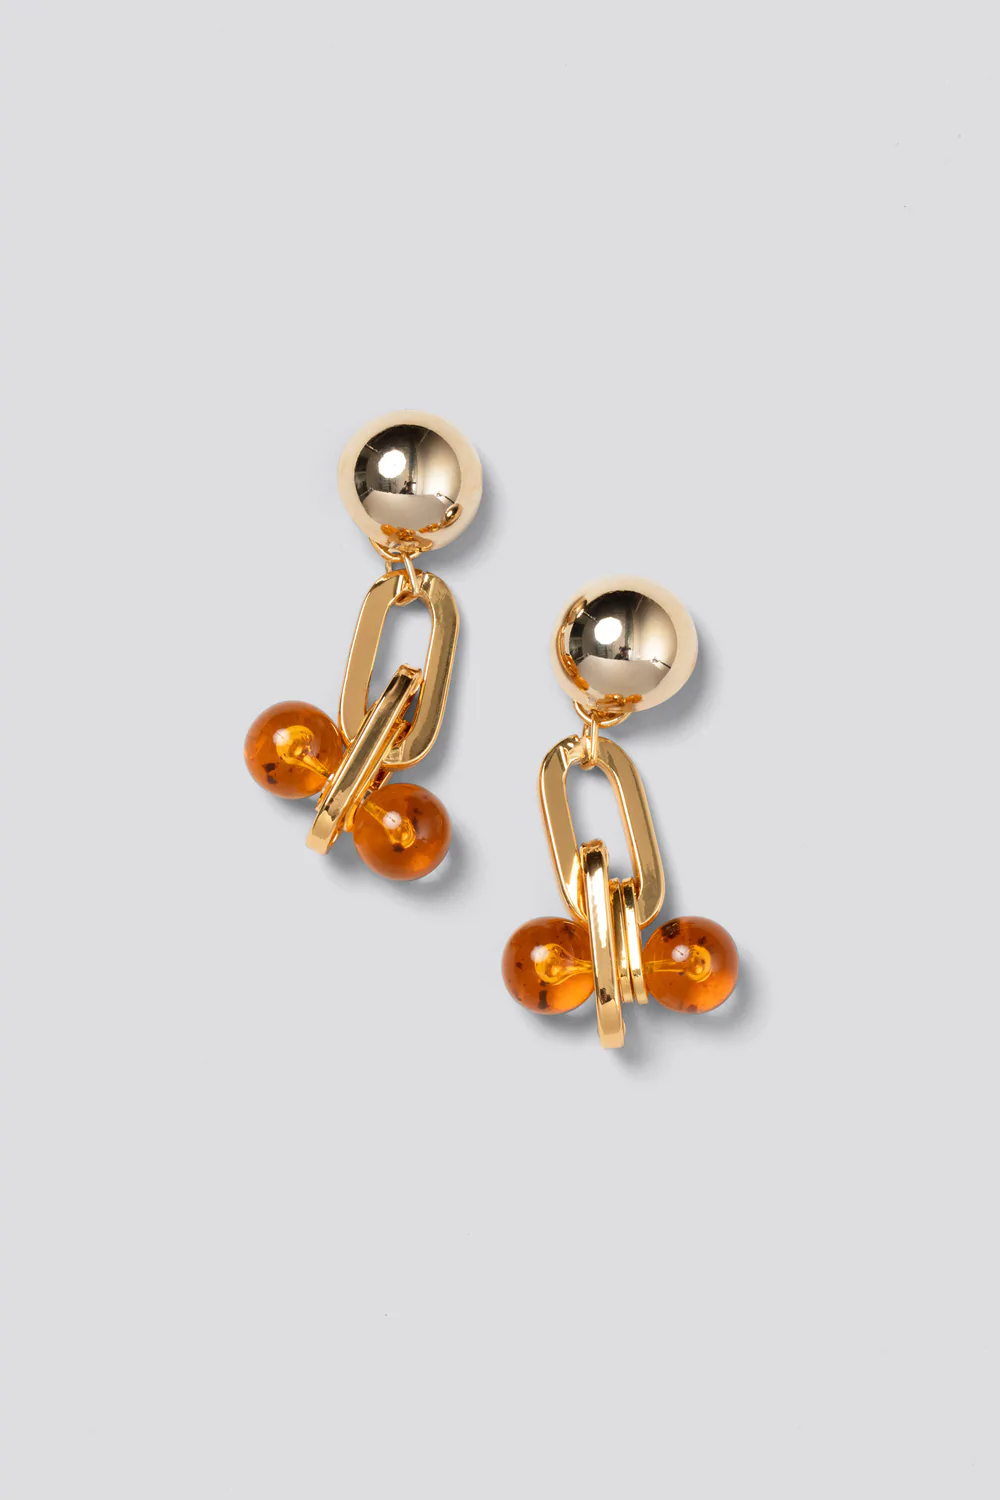 Product Image for Inti Earrings, Amber